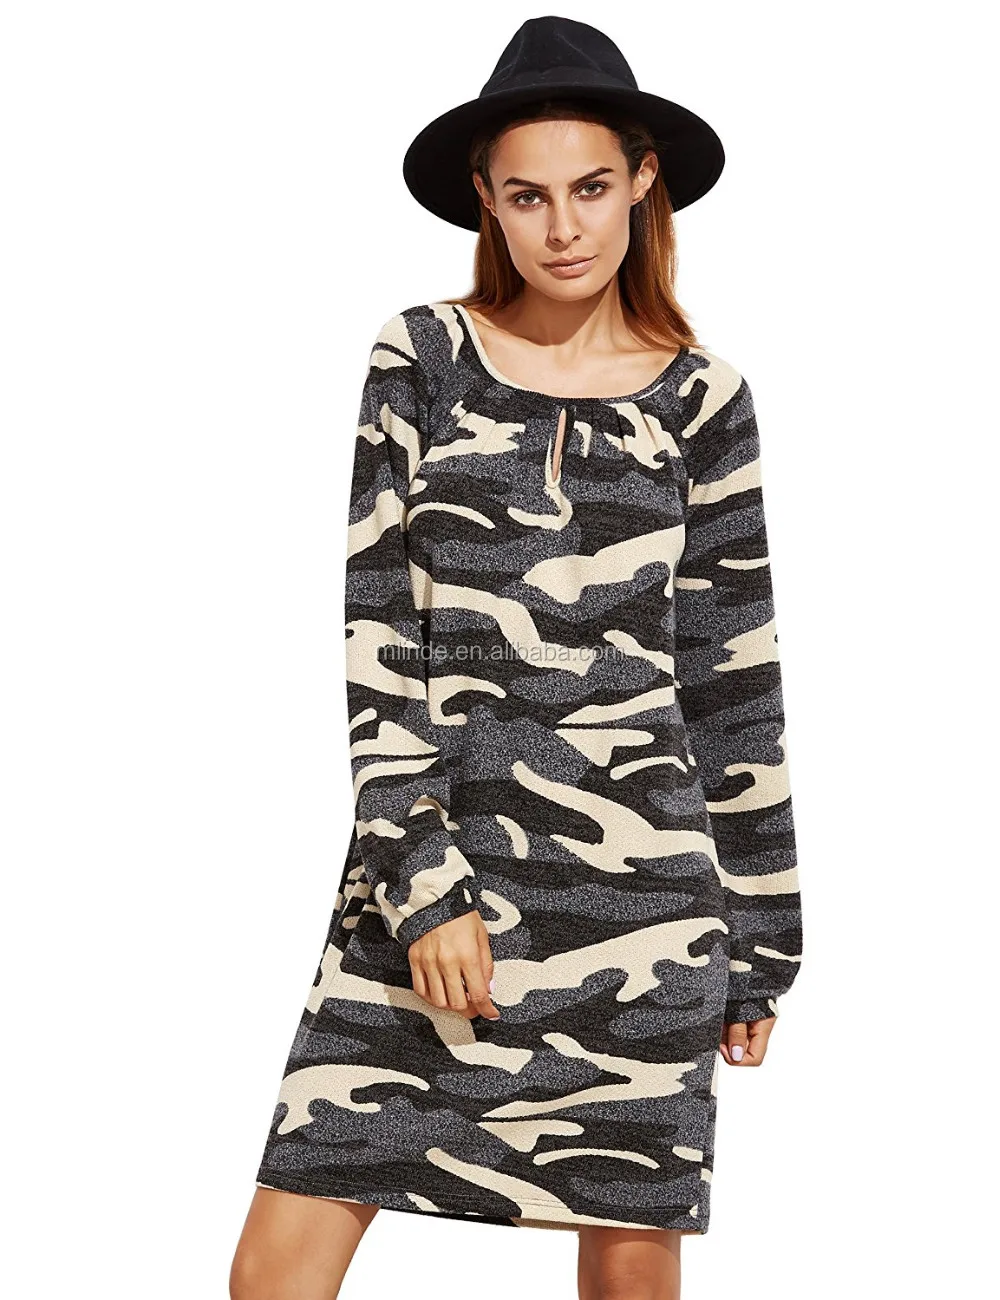 Women's Round Neck Camouflage Dresses Long Sleeve Casual Loose Camo ...